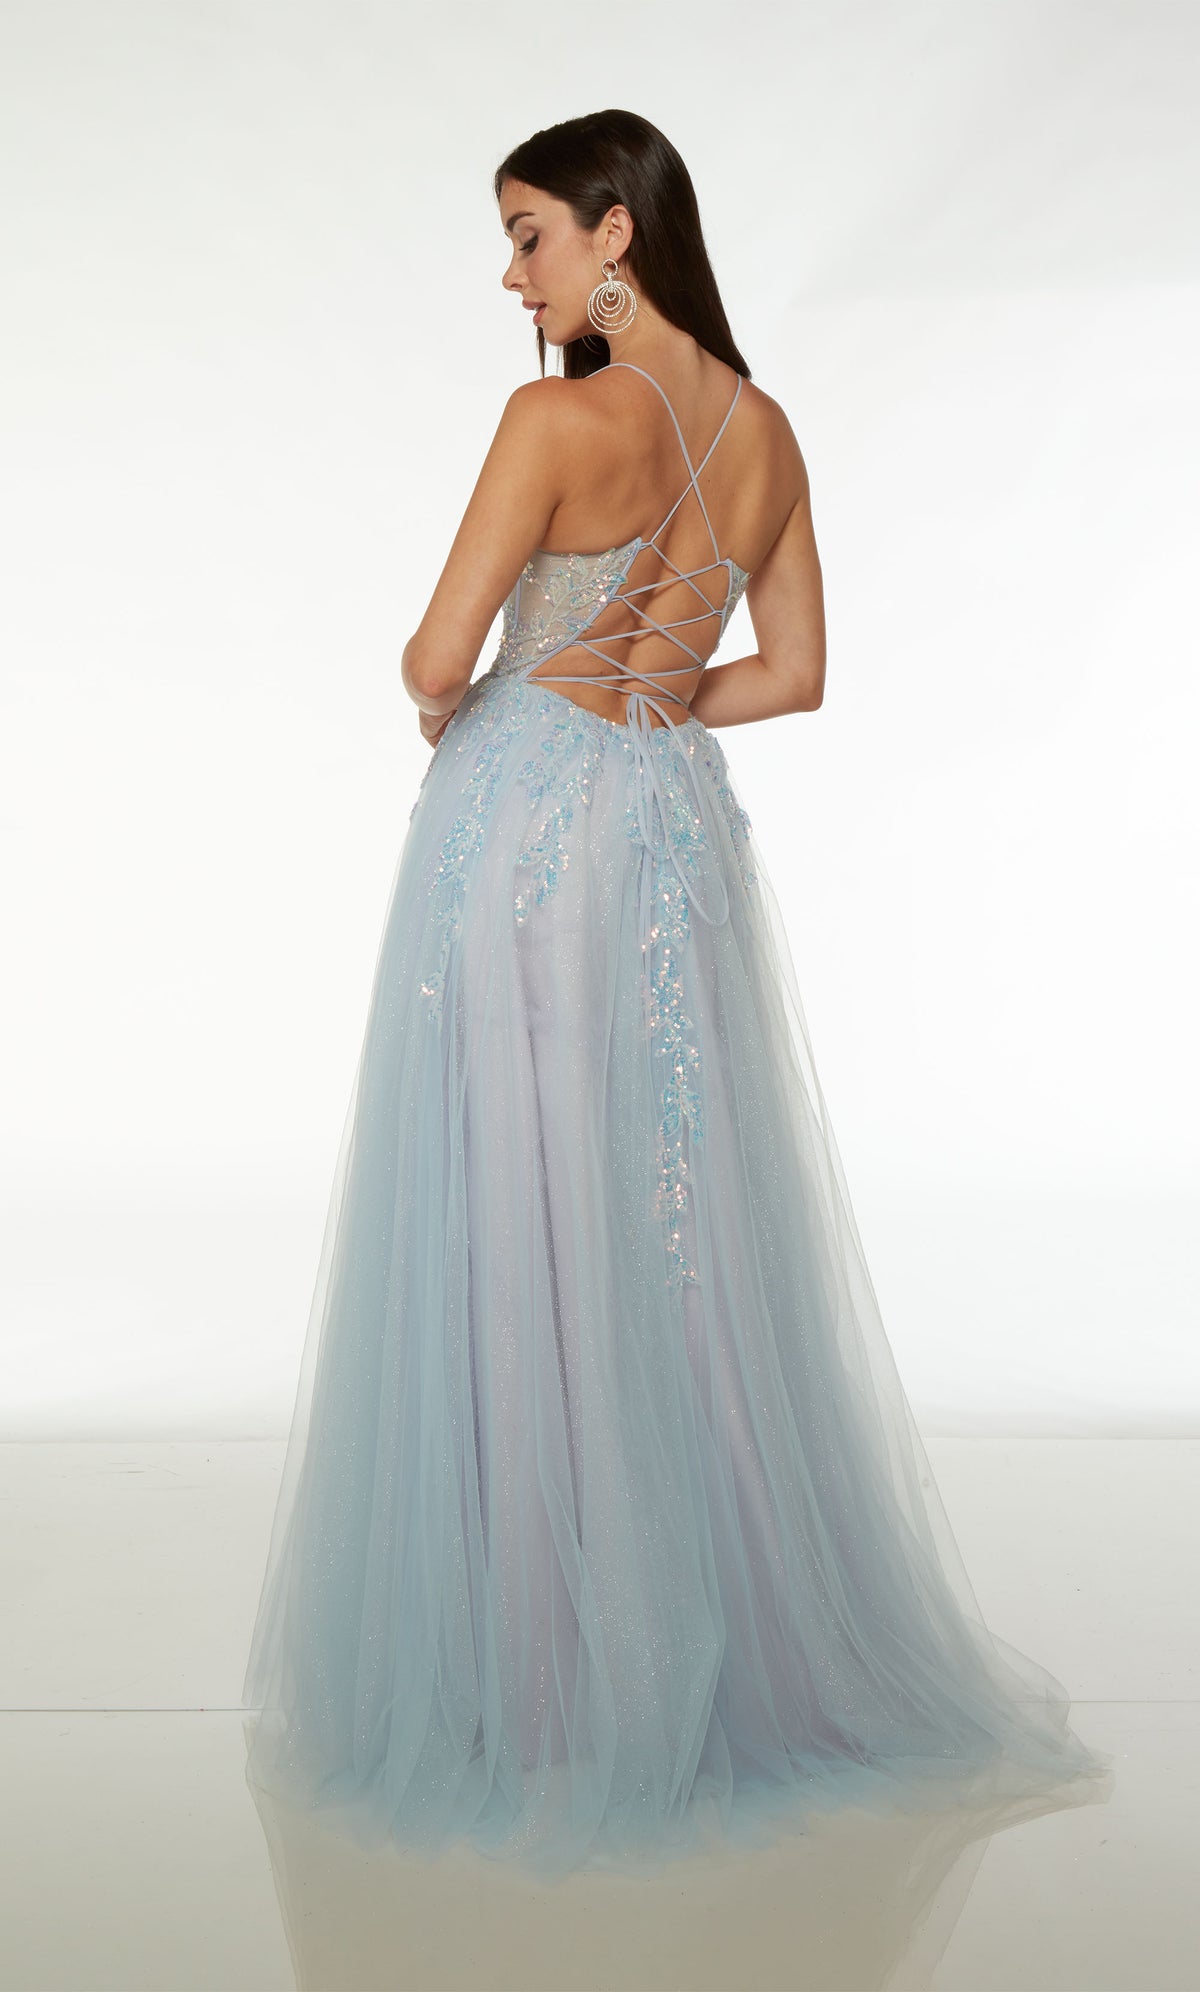 Magical light blue-purple ball gown: sheer corset bodice, spaghetti straps, lace-up back, train, sequined floral lace appliques—pure enchantment.